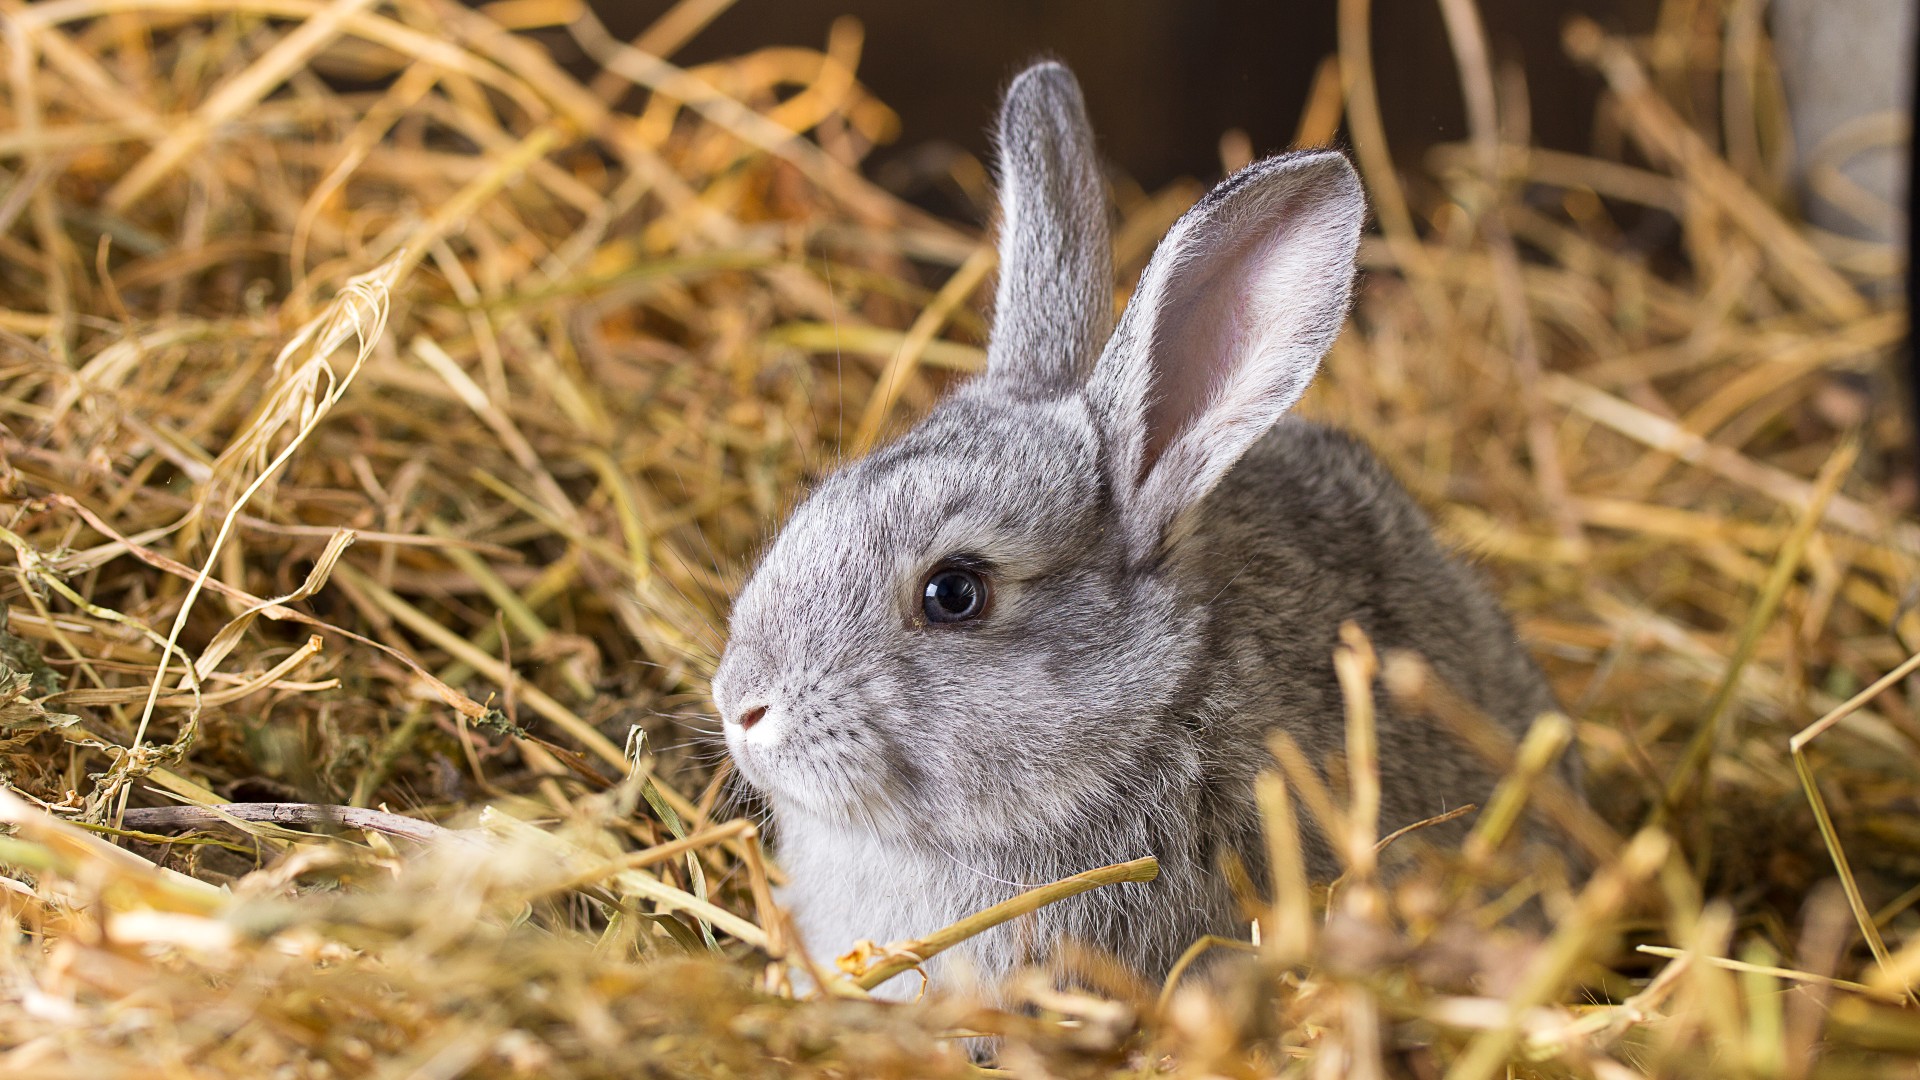 Eye Inflammation in Rabbits